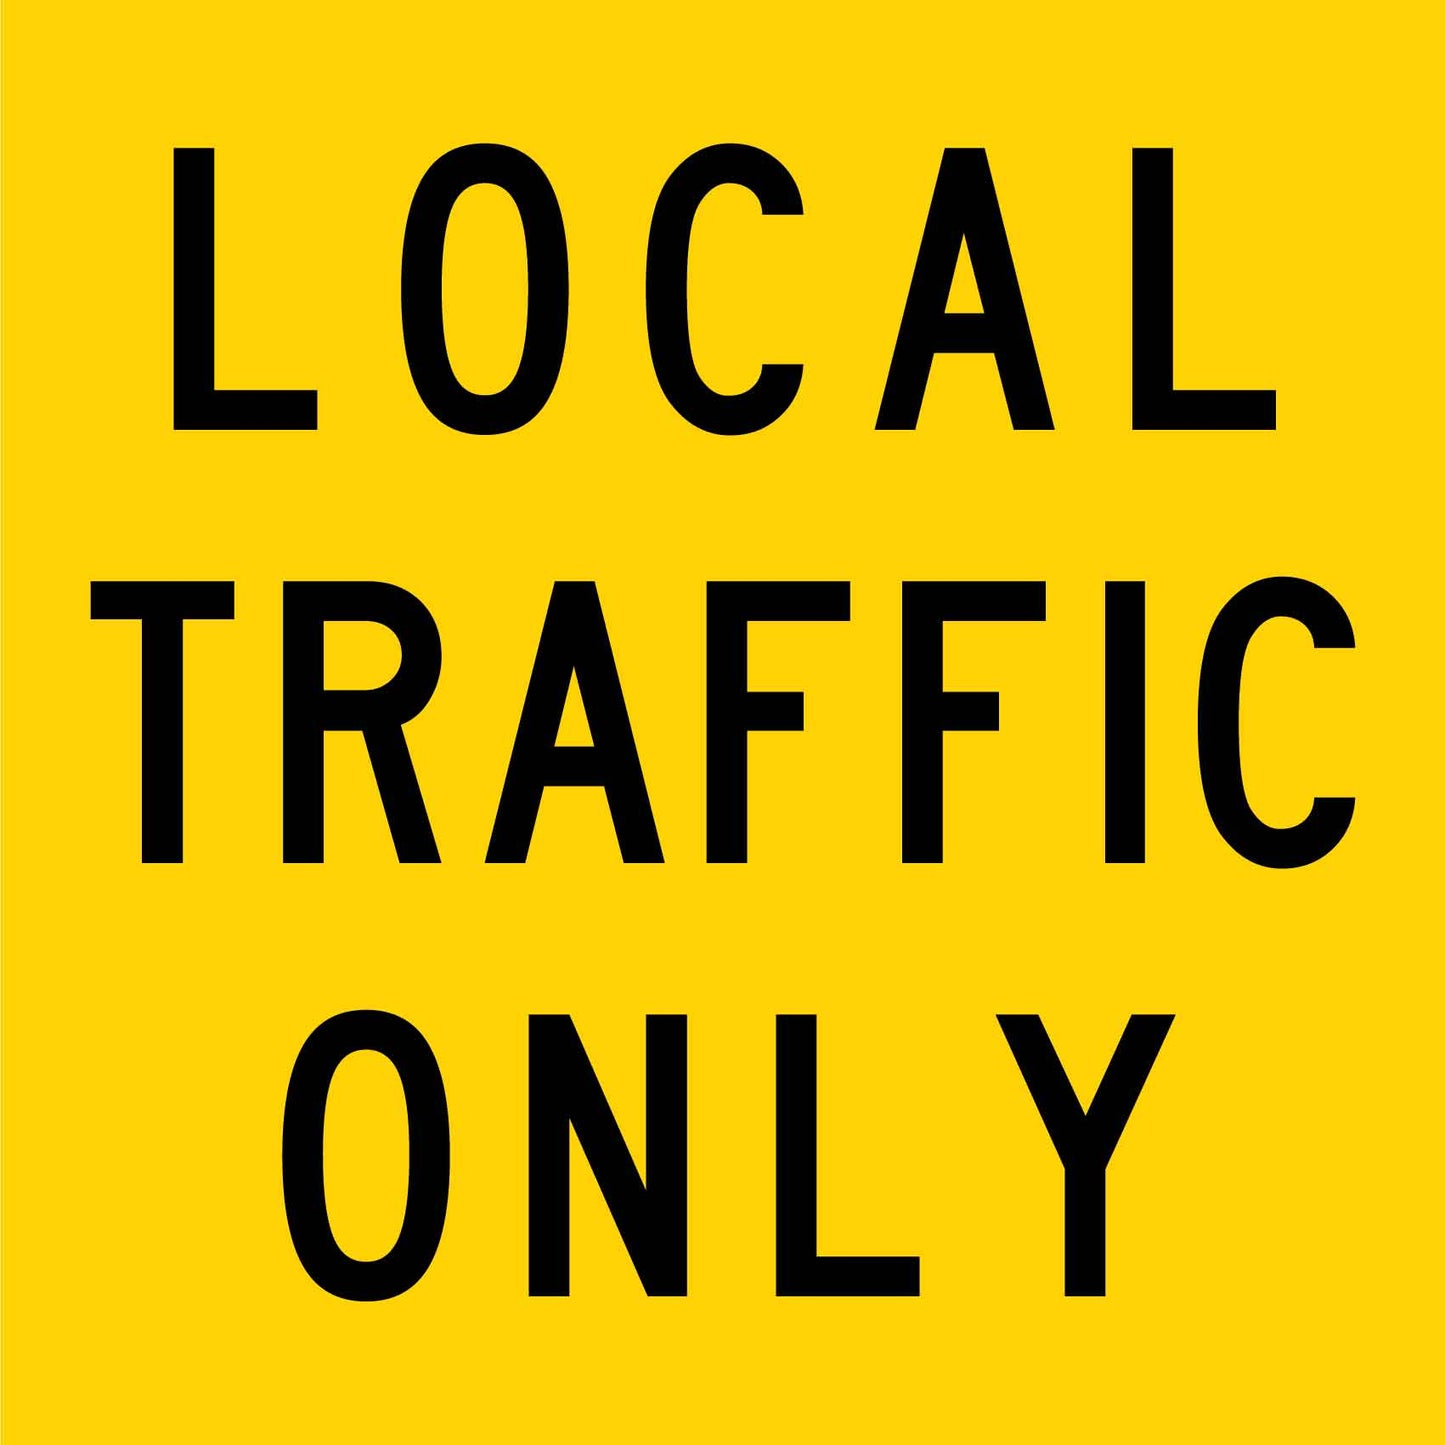 Local Traffic Only Multi Message Reflective Traffic Sign